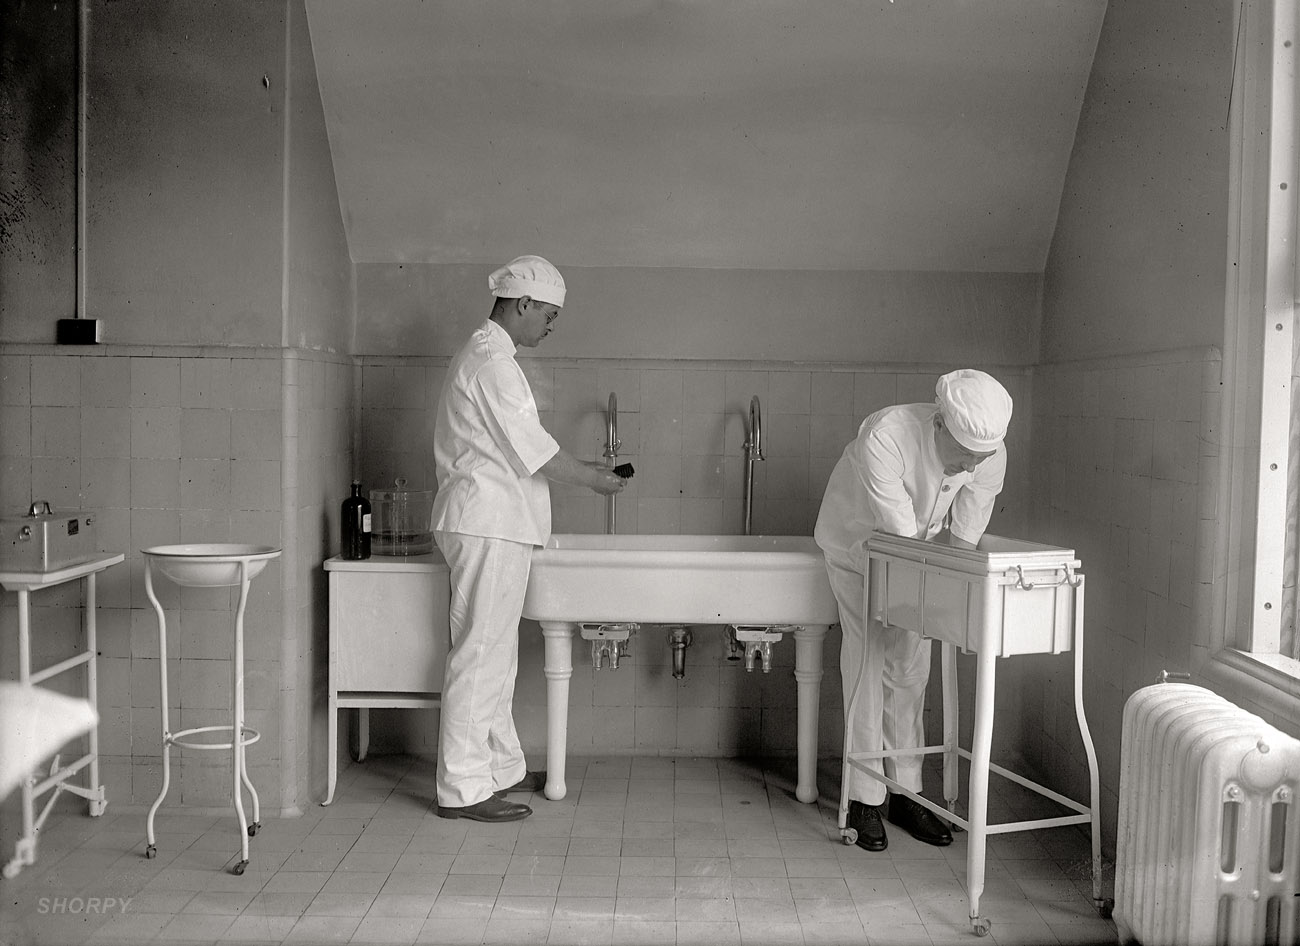 1922. "Surgery #9." One last peek inside the OR before moving on to other things. Next week we'll return. National Photo Company glass negative. View full size.